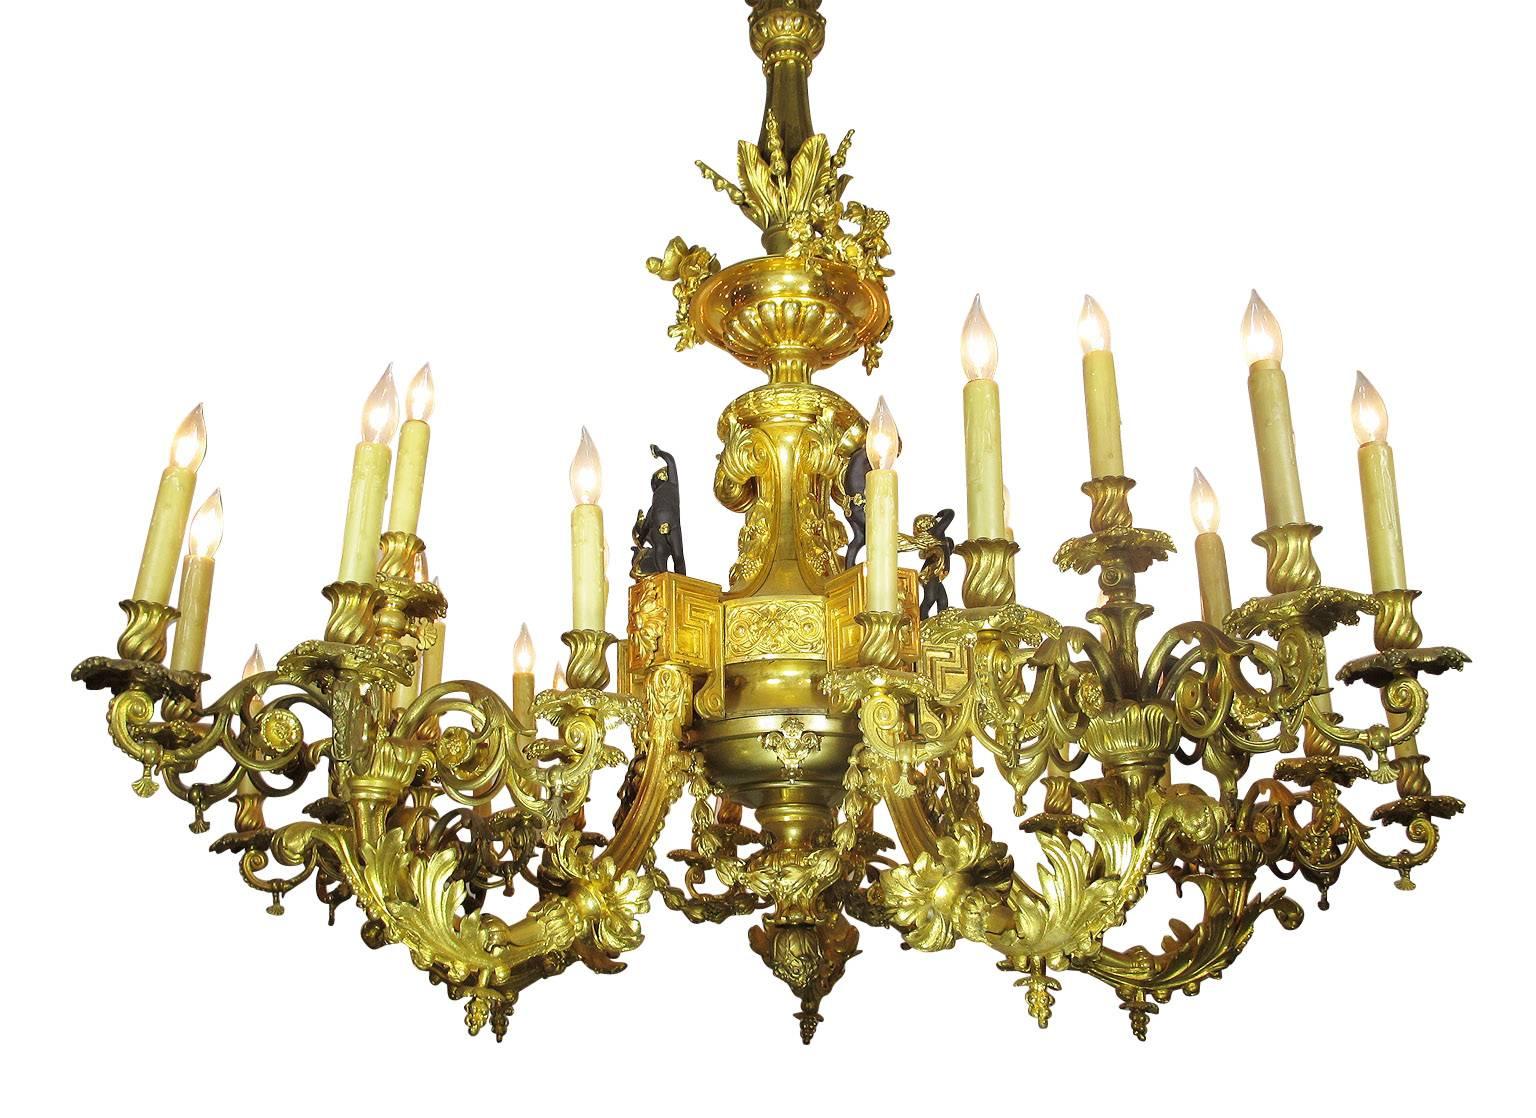 A palatial antique French 19th century very finely chased gilt bronze (ormolu) thirty-five-light figural gasolier chandelier with allegorical figures of ebonized putti (children) playing musical instruments, all mercury gilt is original and in